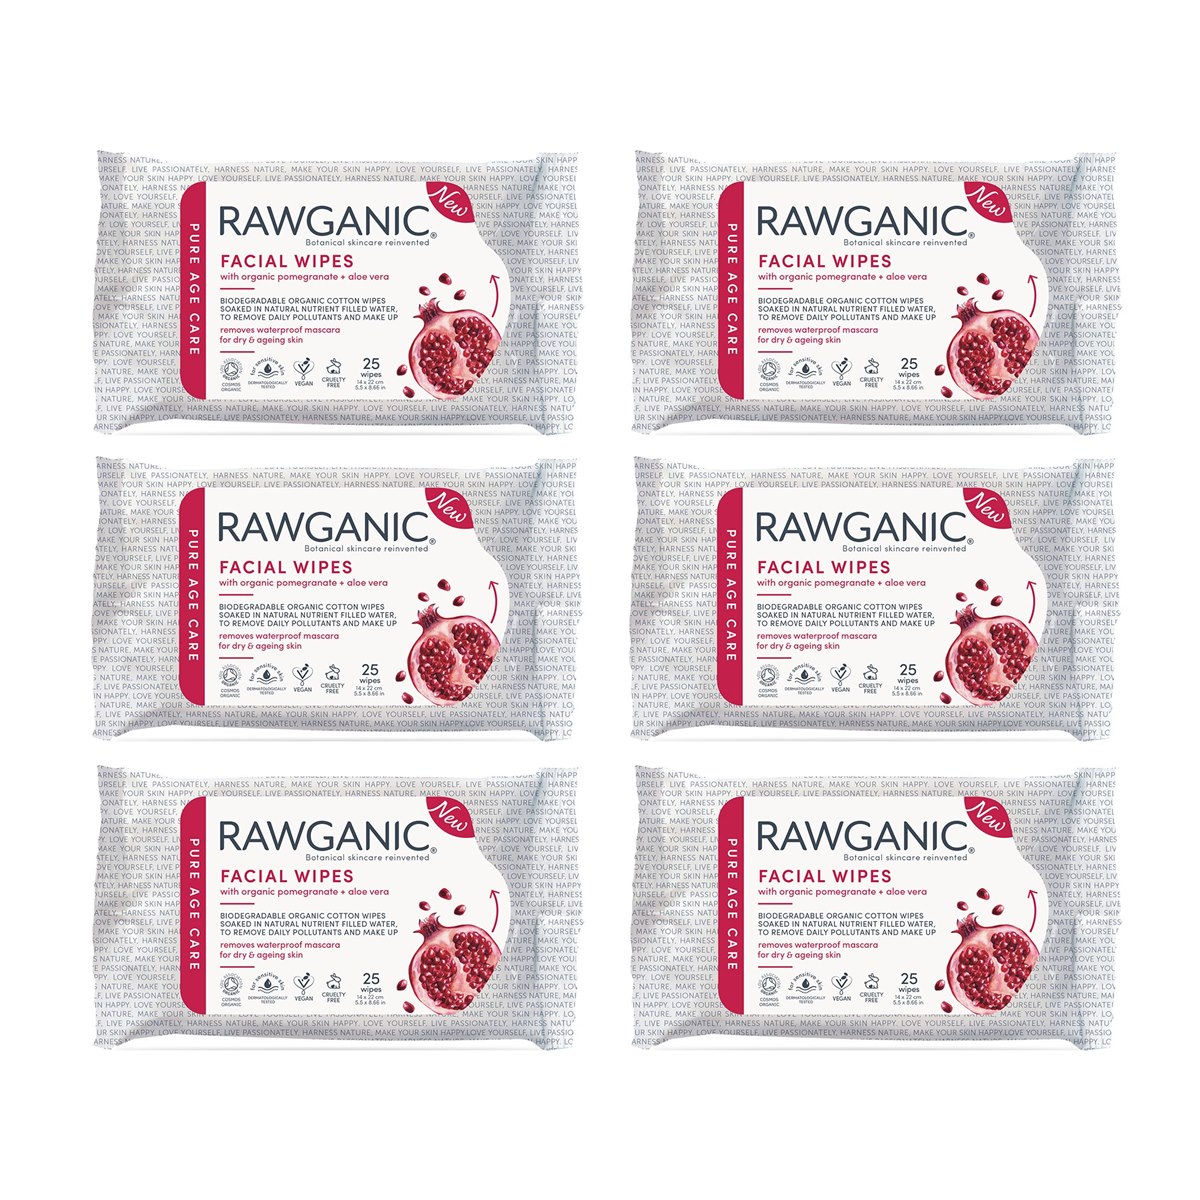 Case of 6 x Rawganic Pure Age Care Anti-Aging Facial Wipes Pack of 25